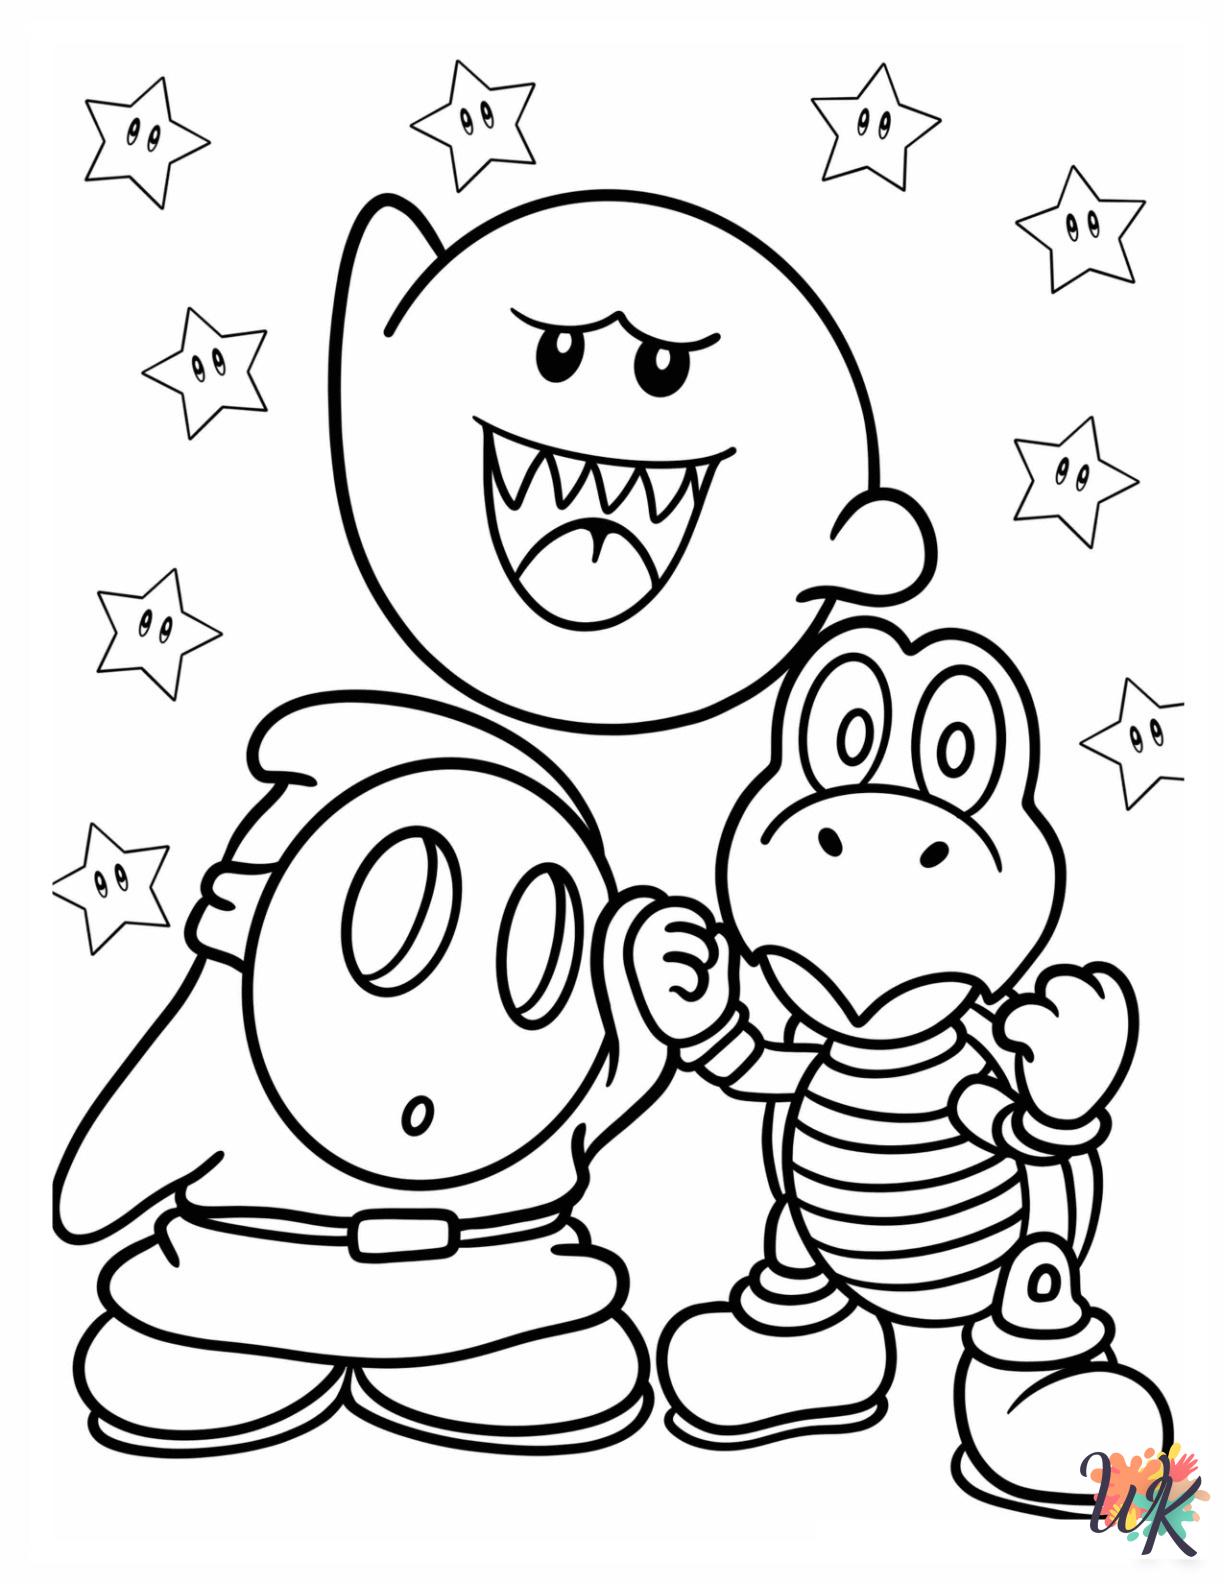 Shy Guy coloring pages printable